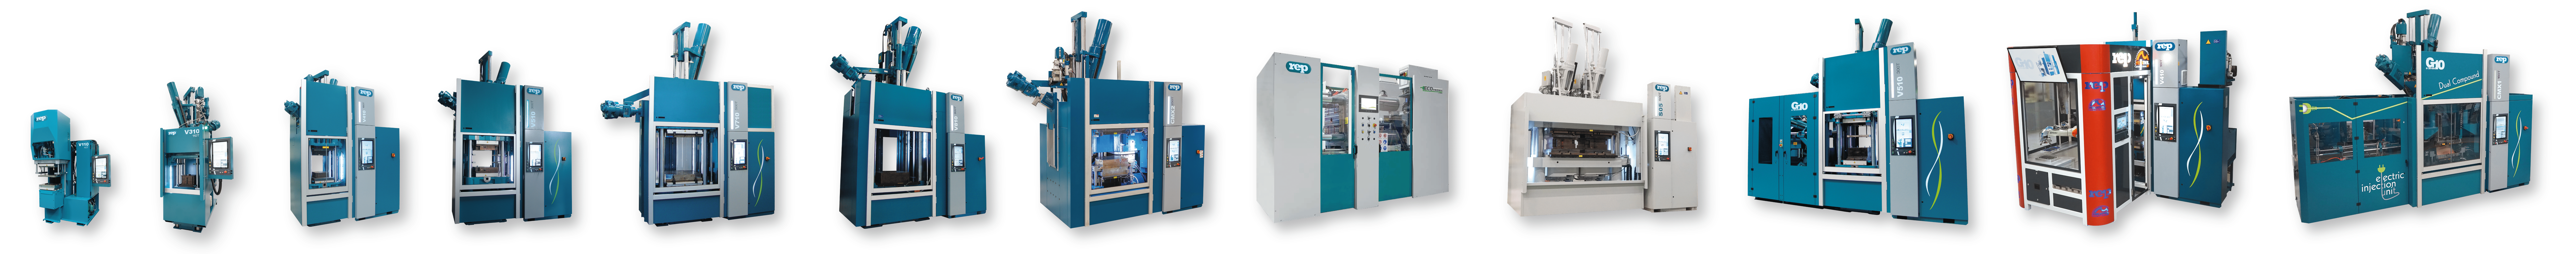 REP injection molding machines and RPM horizontal hydroelectric machines